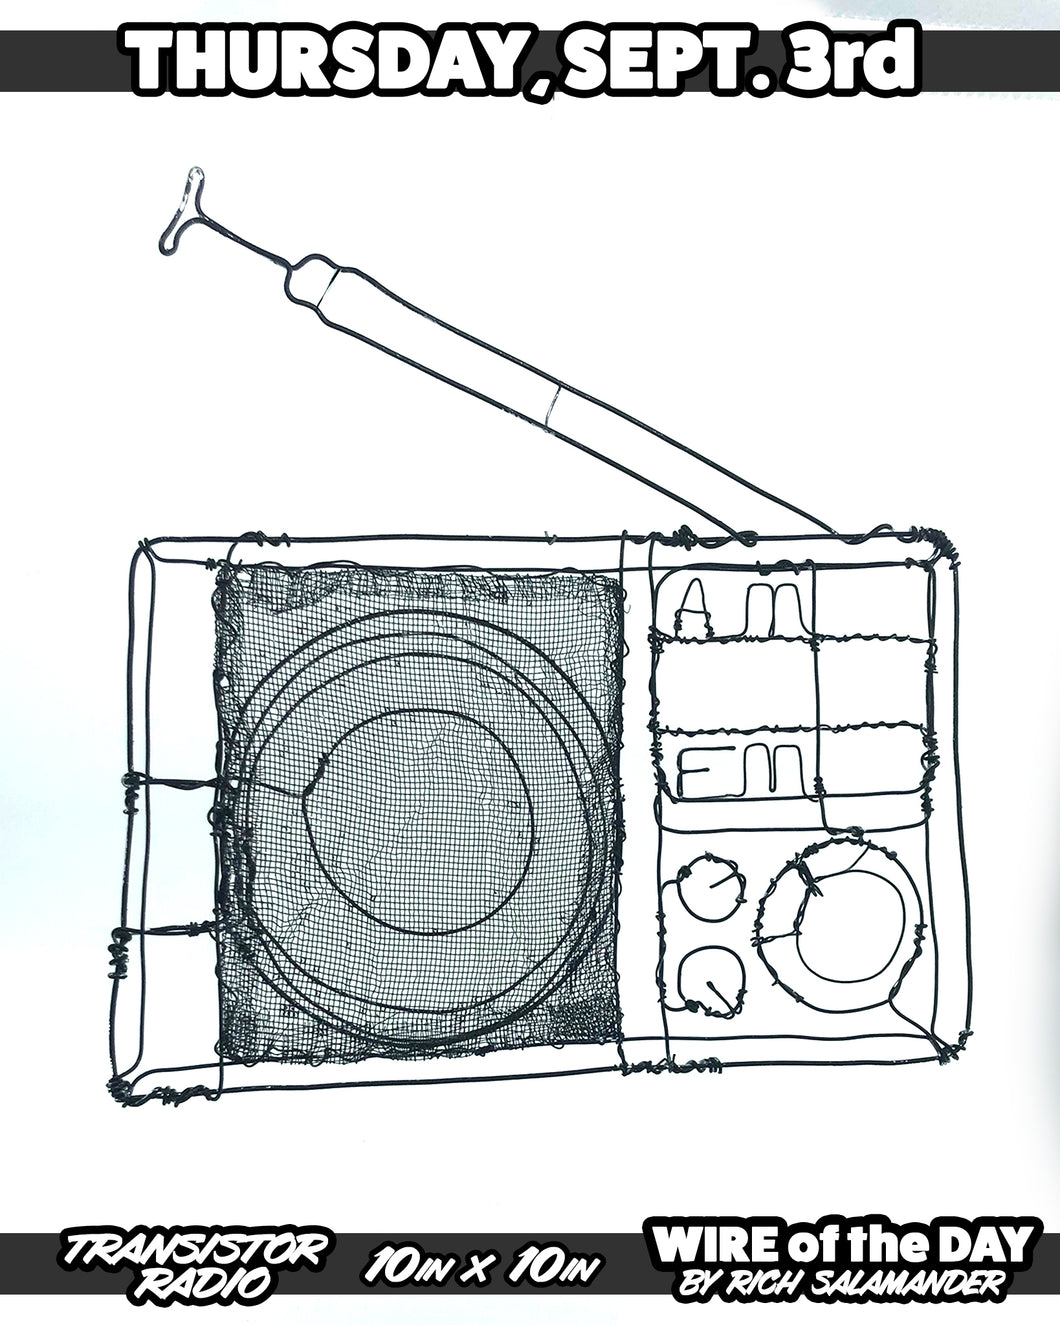 WIRE of the DAY TRANSISTOR RADIO